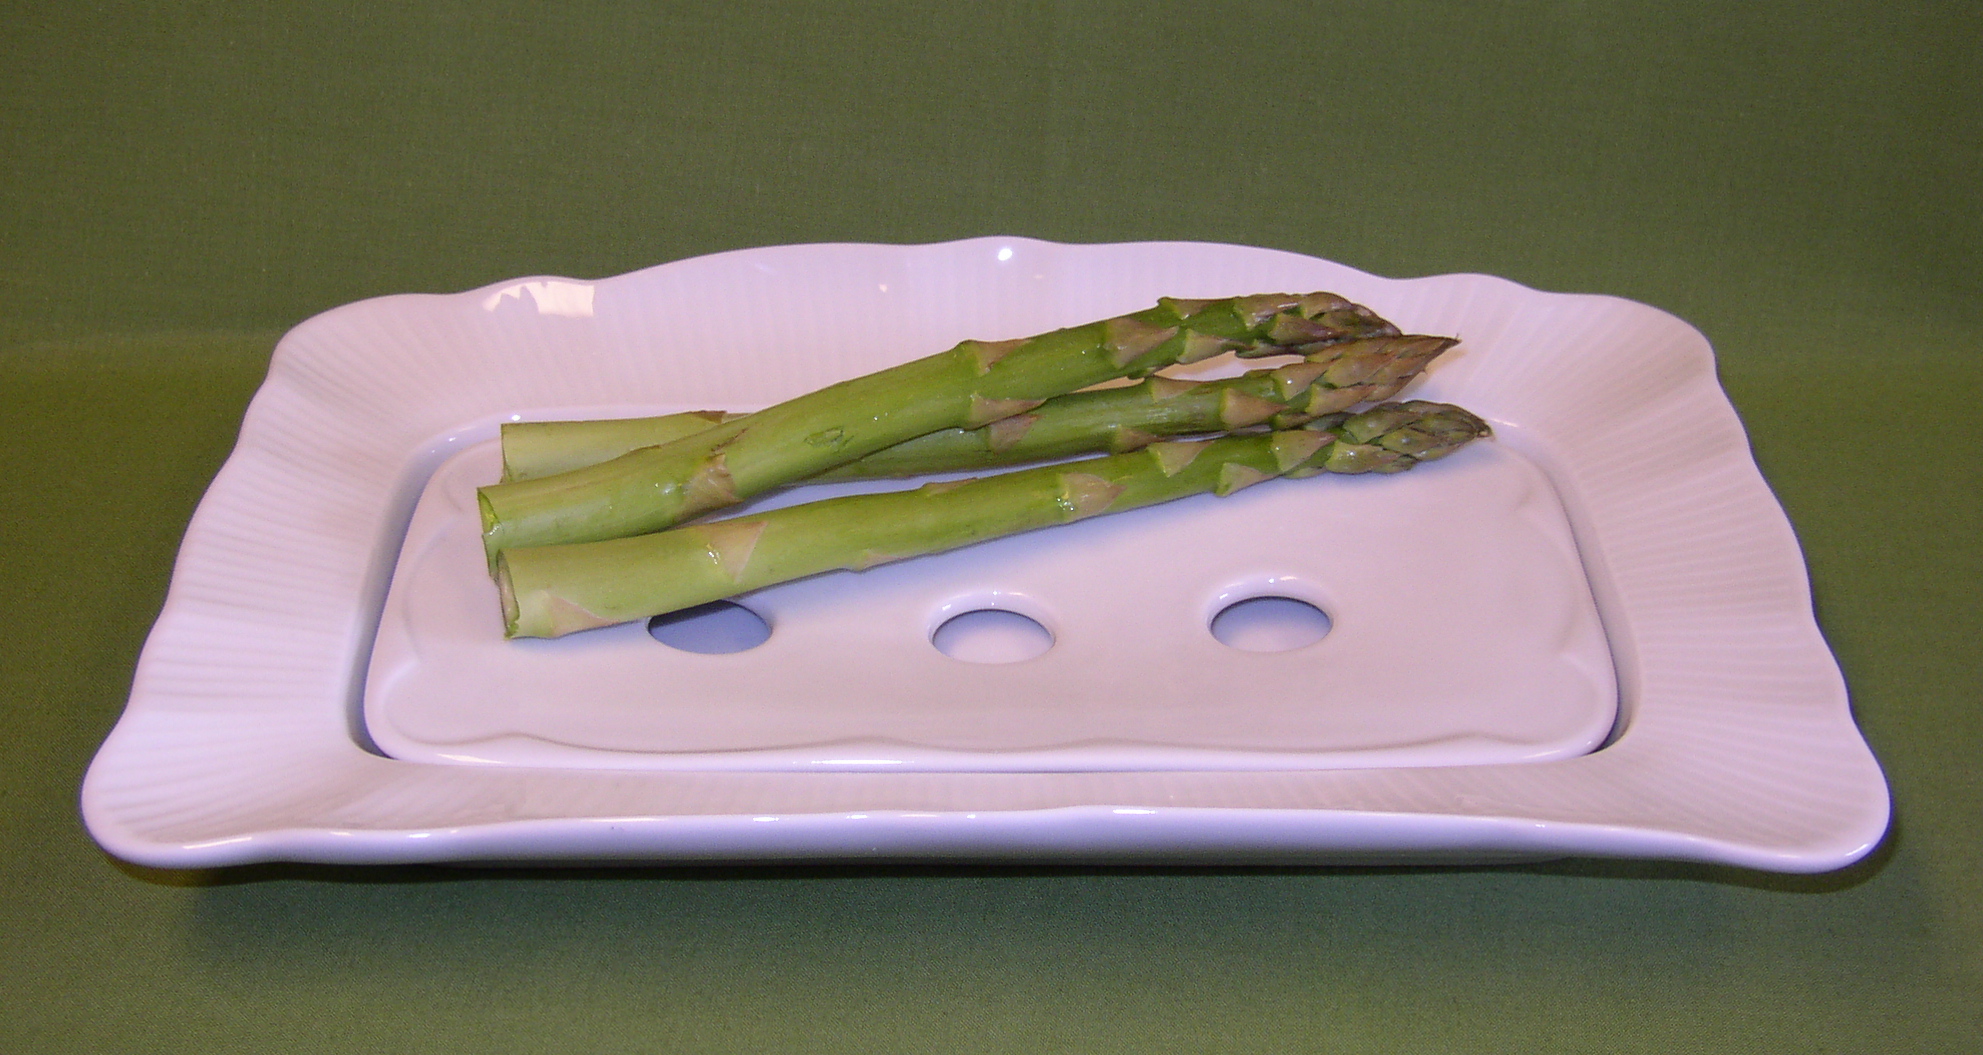 French porcelain asparagus serving plate- liquid drains to dish below for maintaining crispness